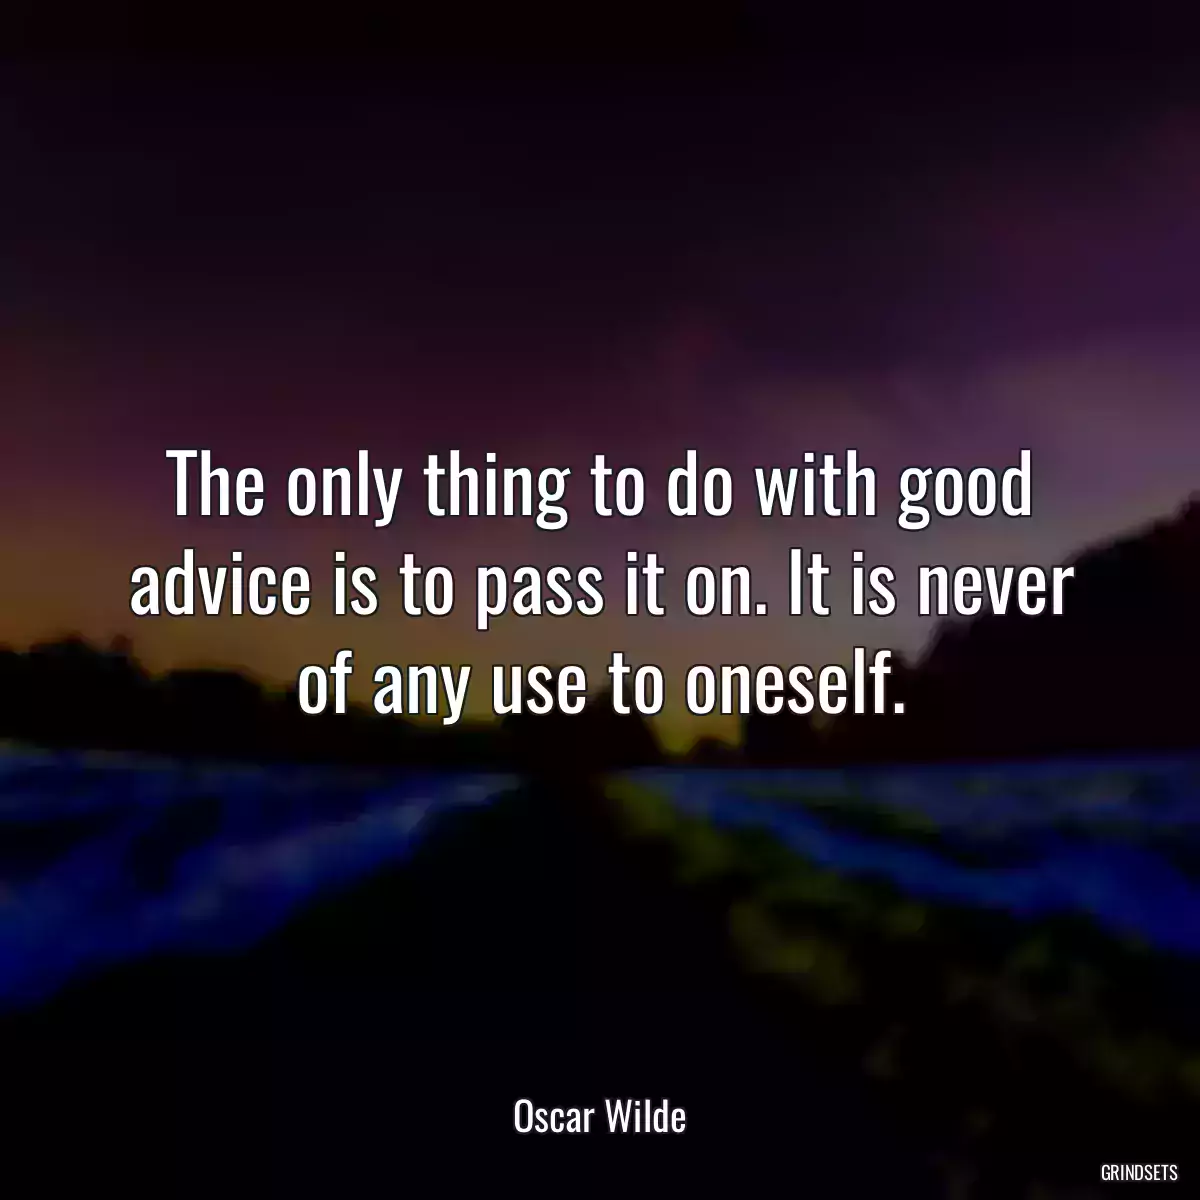 The only thing to do with good advice is to pass it on. It is never of any use to oneself.